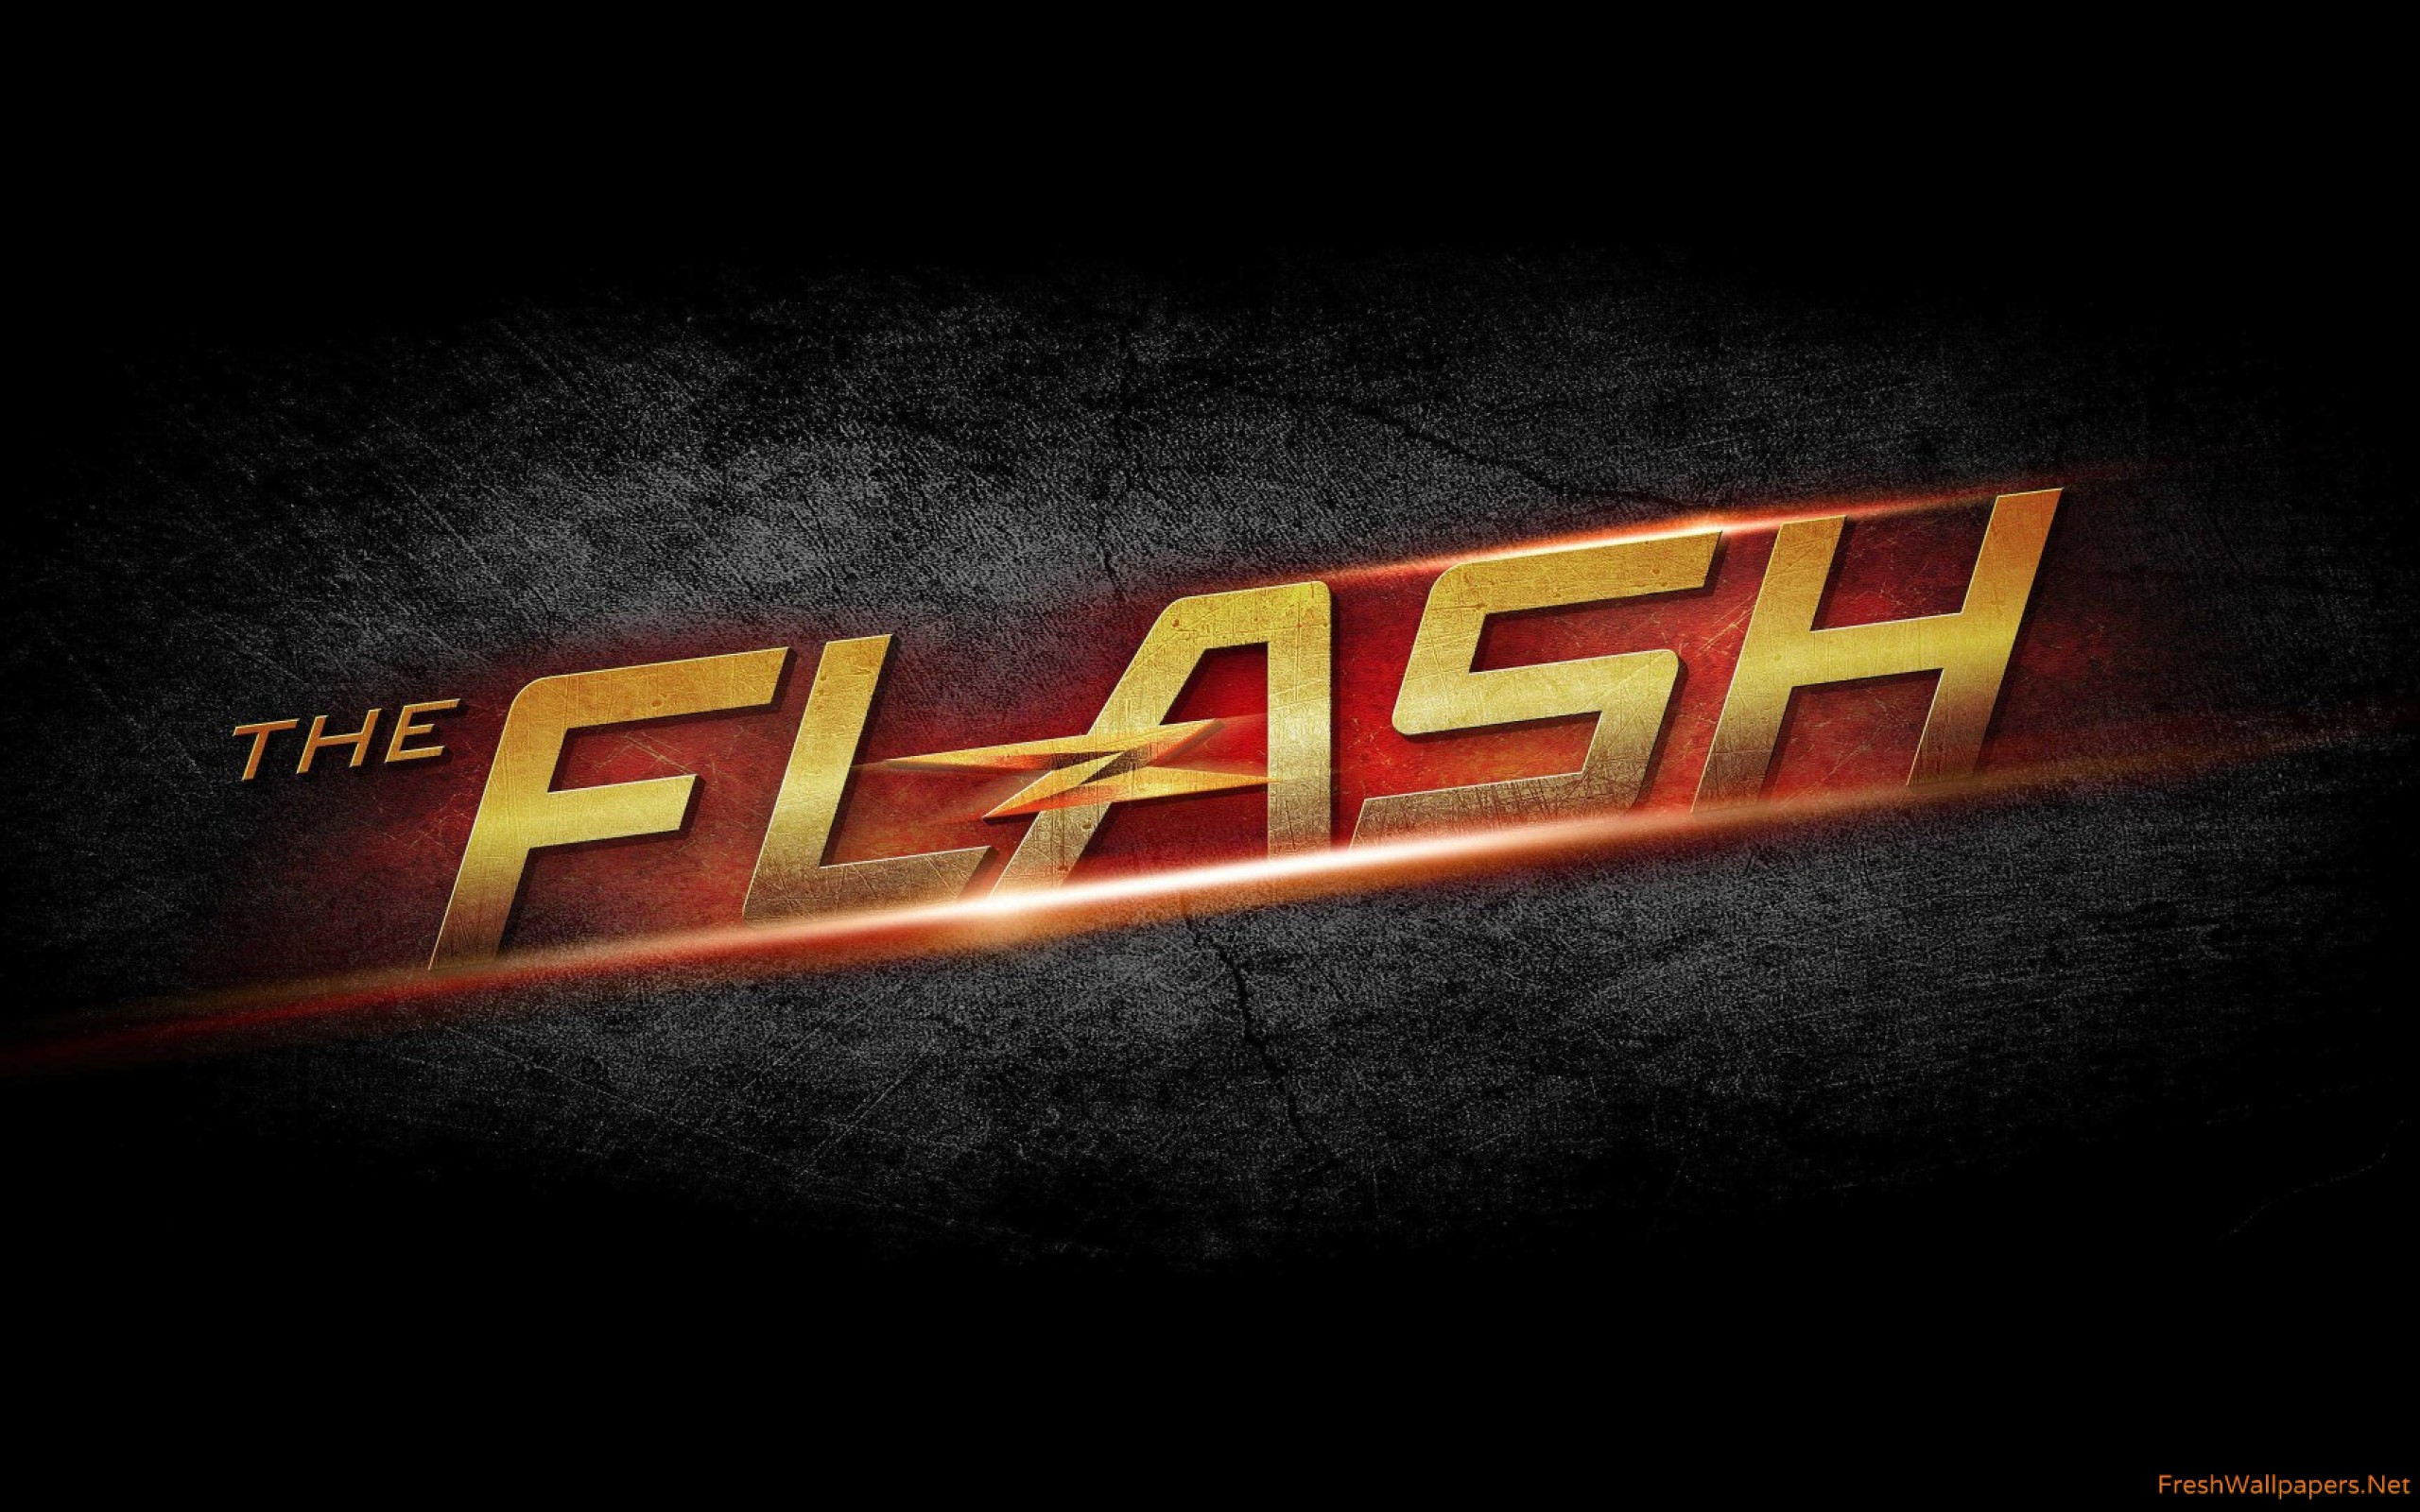 The Flash Tv Series Logo wallpapers Freshwallpapers